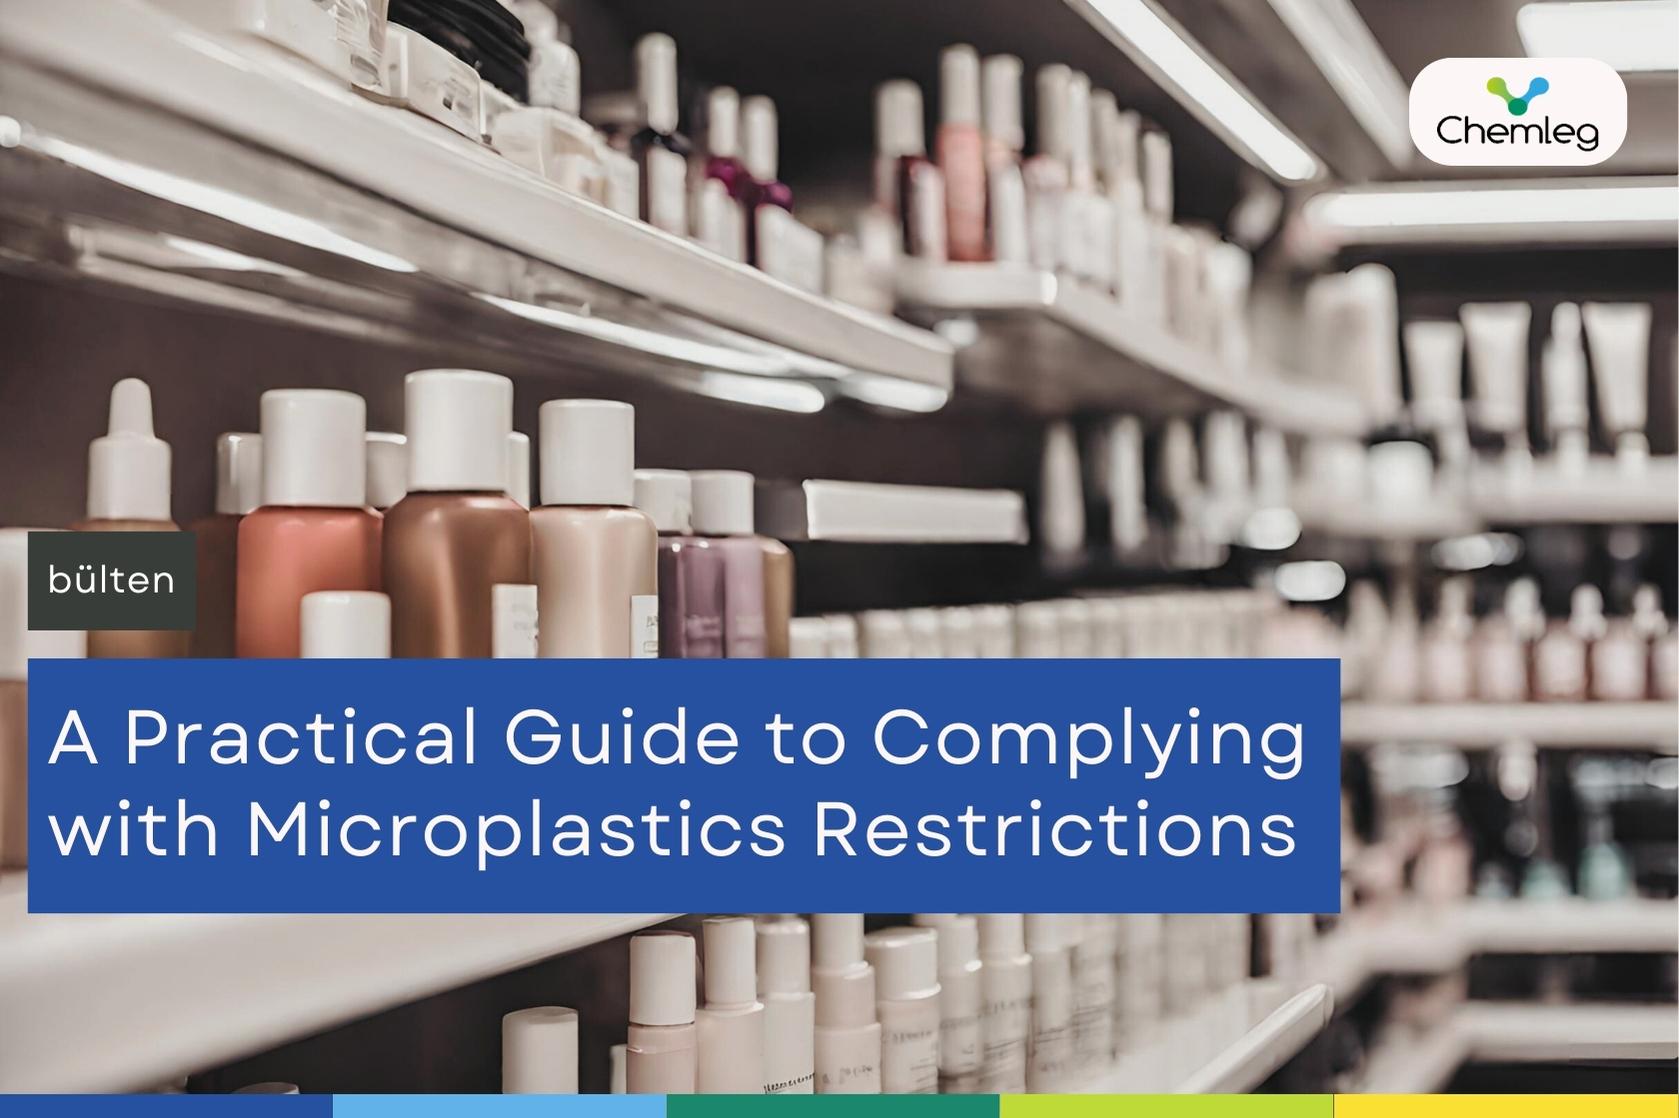 A Practical Guide to Complying with Microplastics Restrictions has been Published